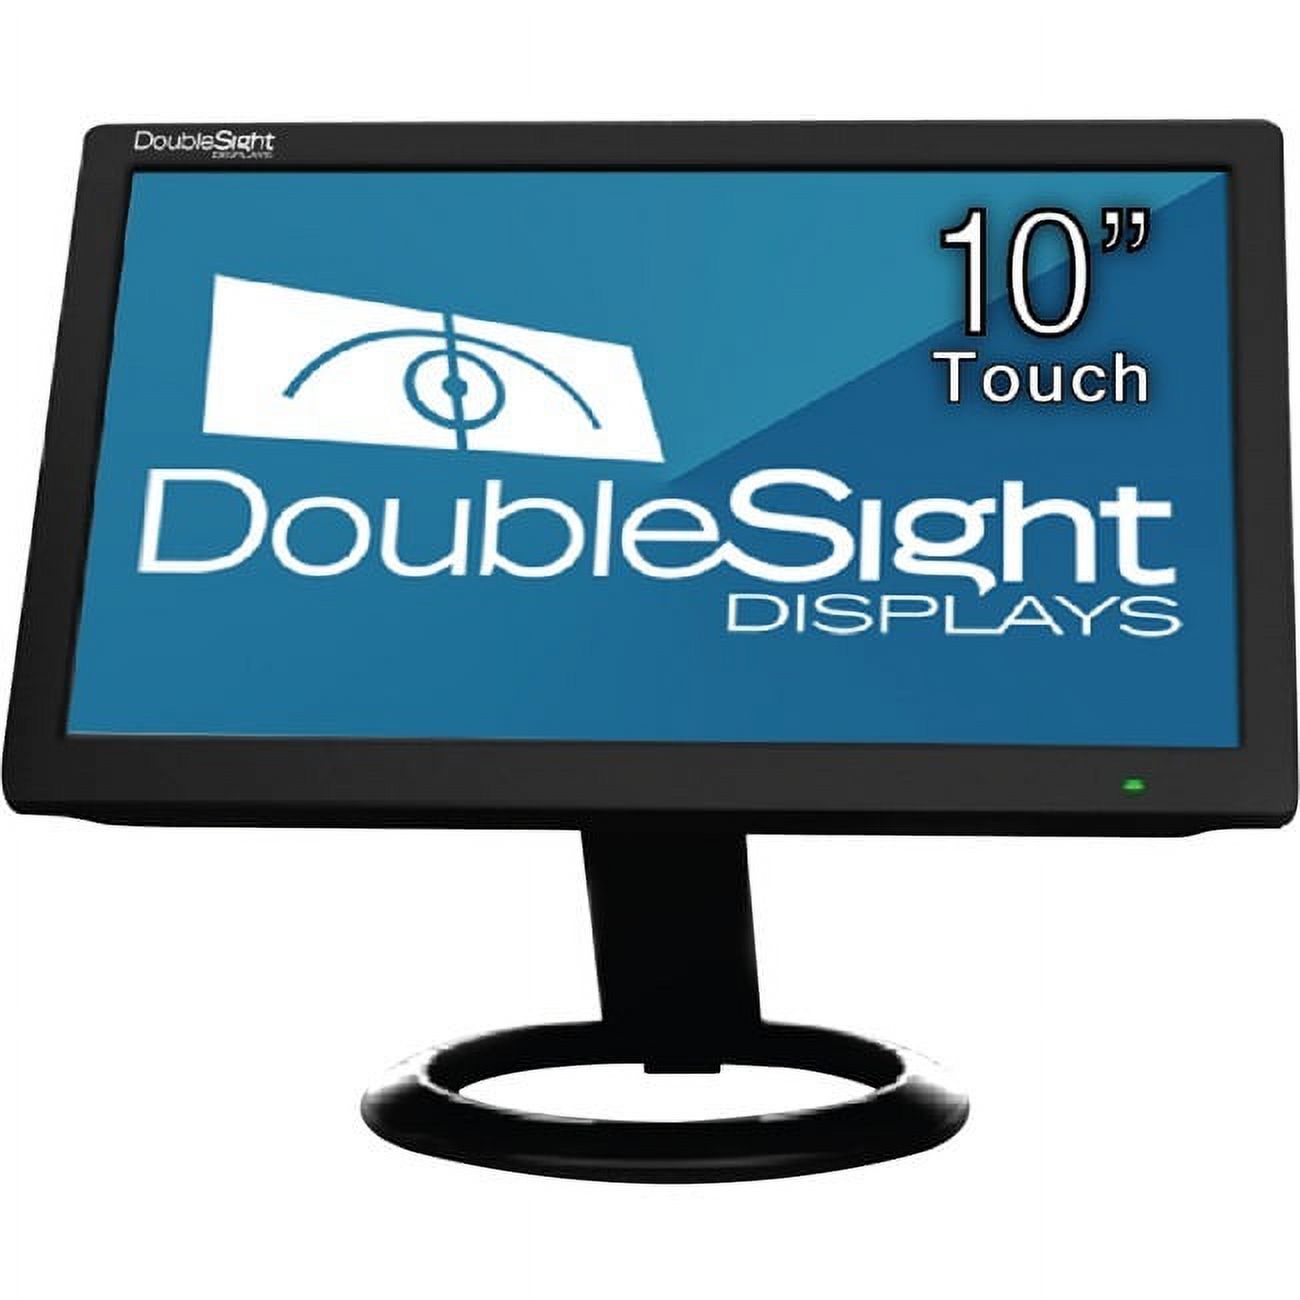 DoubleSight DS-10UT - LCD monitor - 10.1" - touchscreen - 1024 x 600 - 200 cd/m������ - 500:1 - 16 ms - USB - black - image 2 of 2